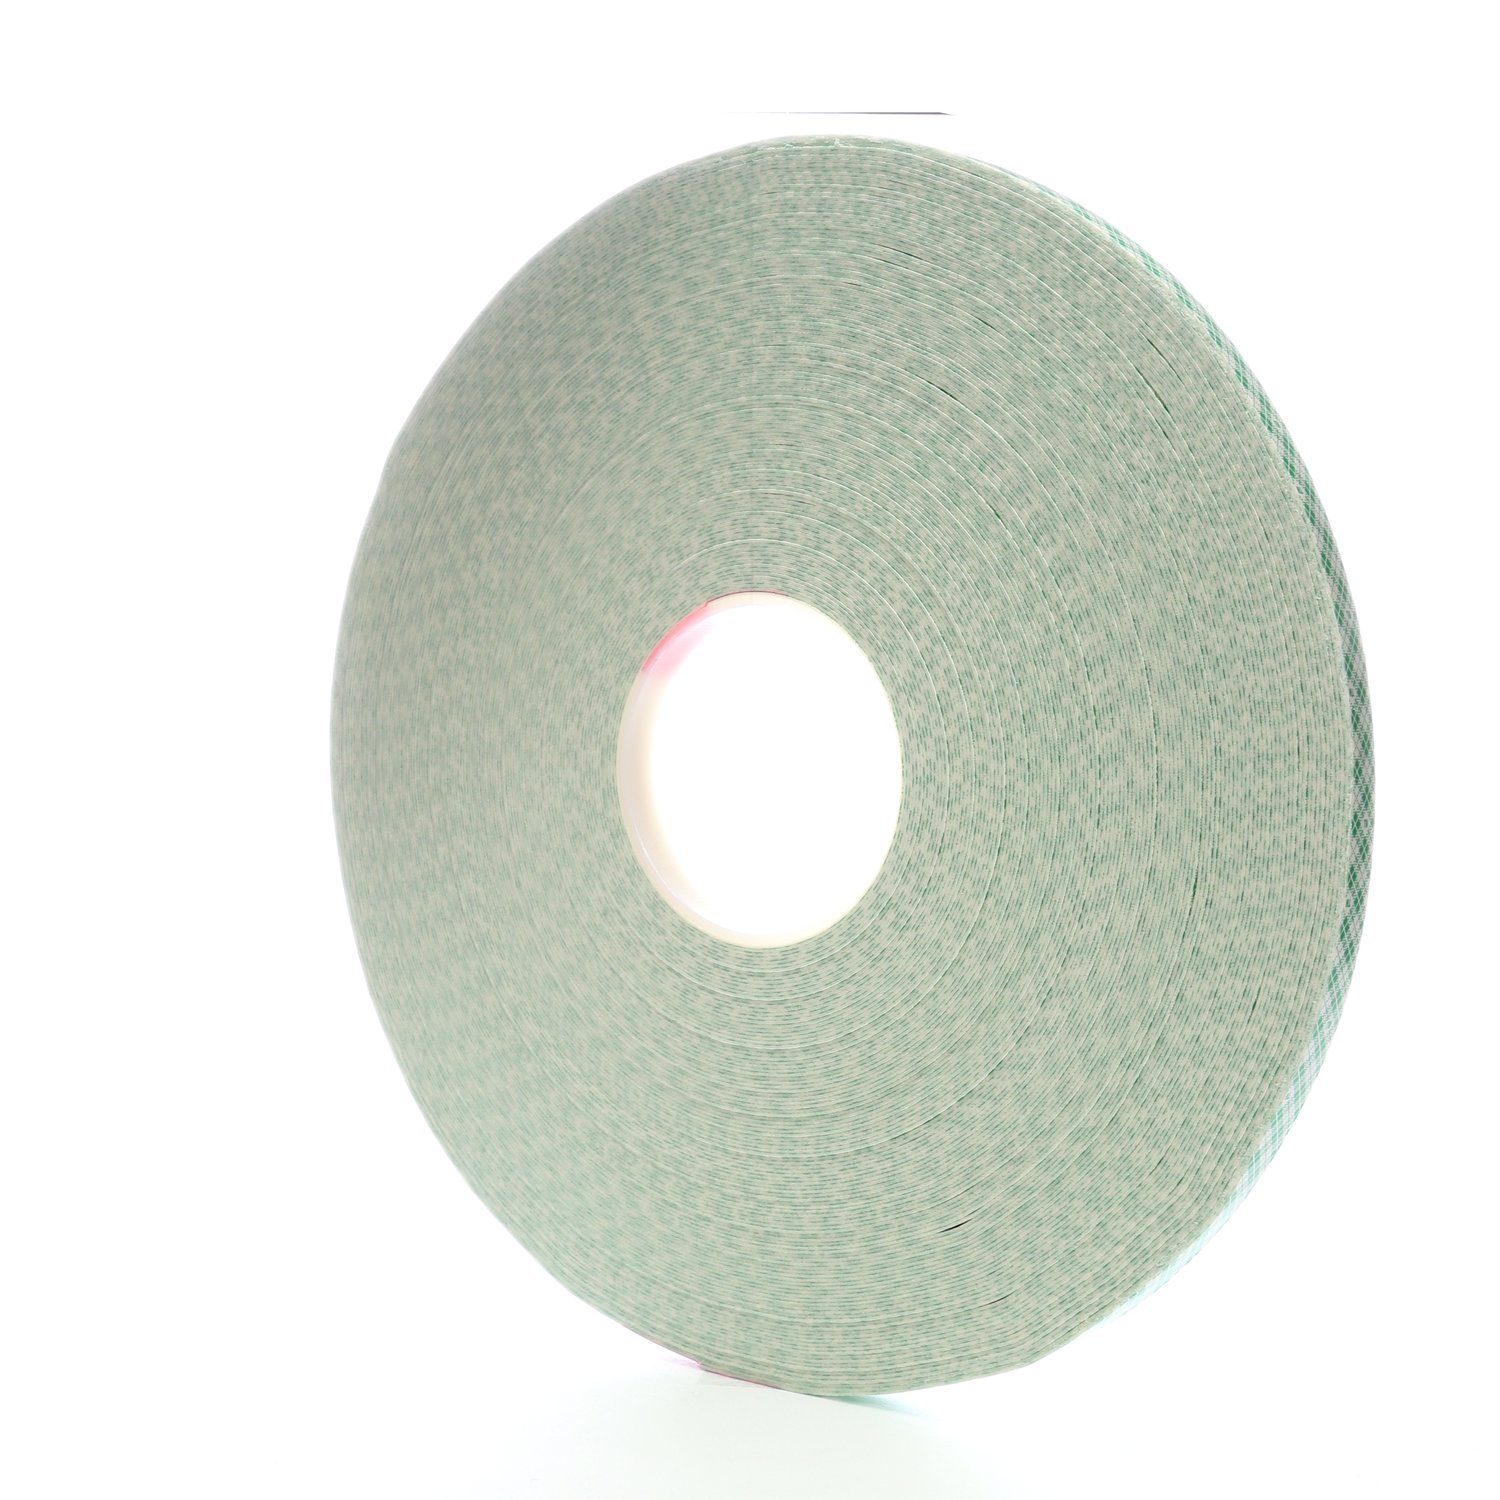 7000048484 - 3M Double Coated Urethane Foam Tape 4032, Off White, 1/2 in x 72 yd, 31
mil, 18 Rolls/Case